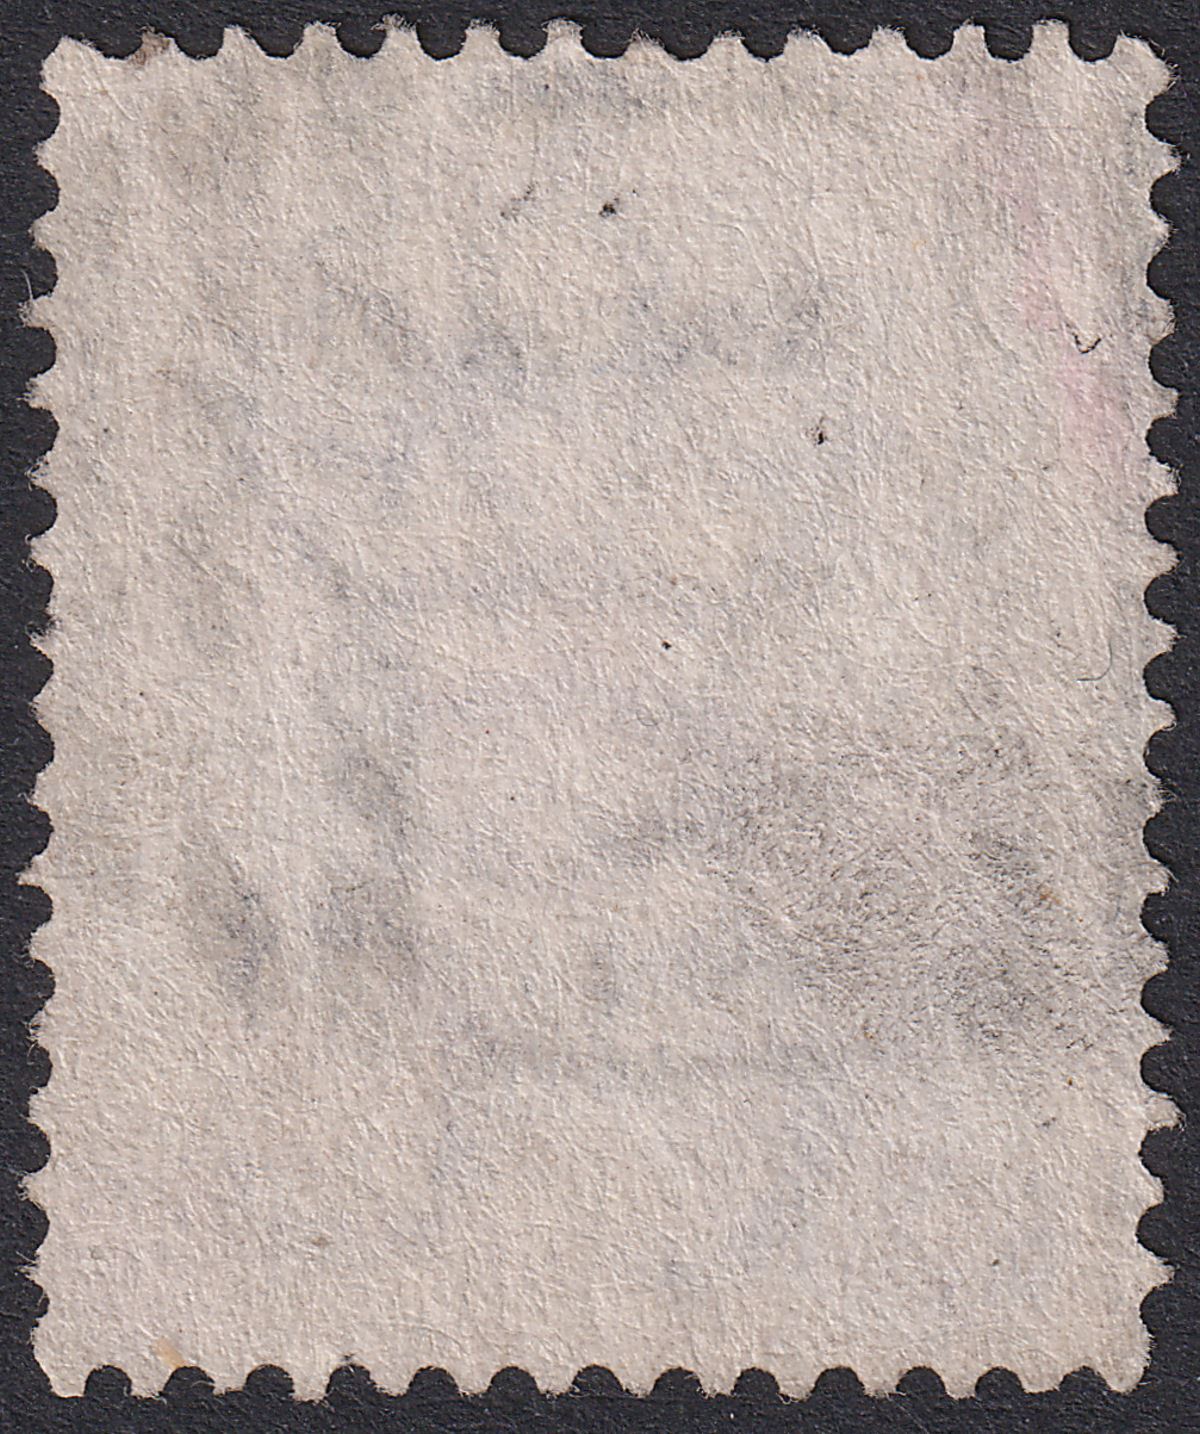 Hong Kong 1863 QV 30c Mauve Used with C1 Postmark Canton SG Z144 cat £26